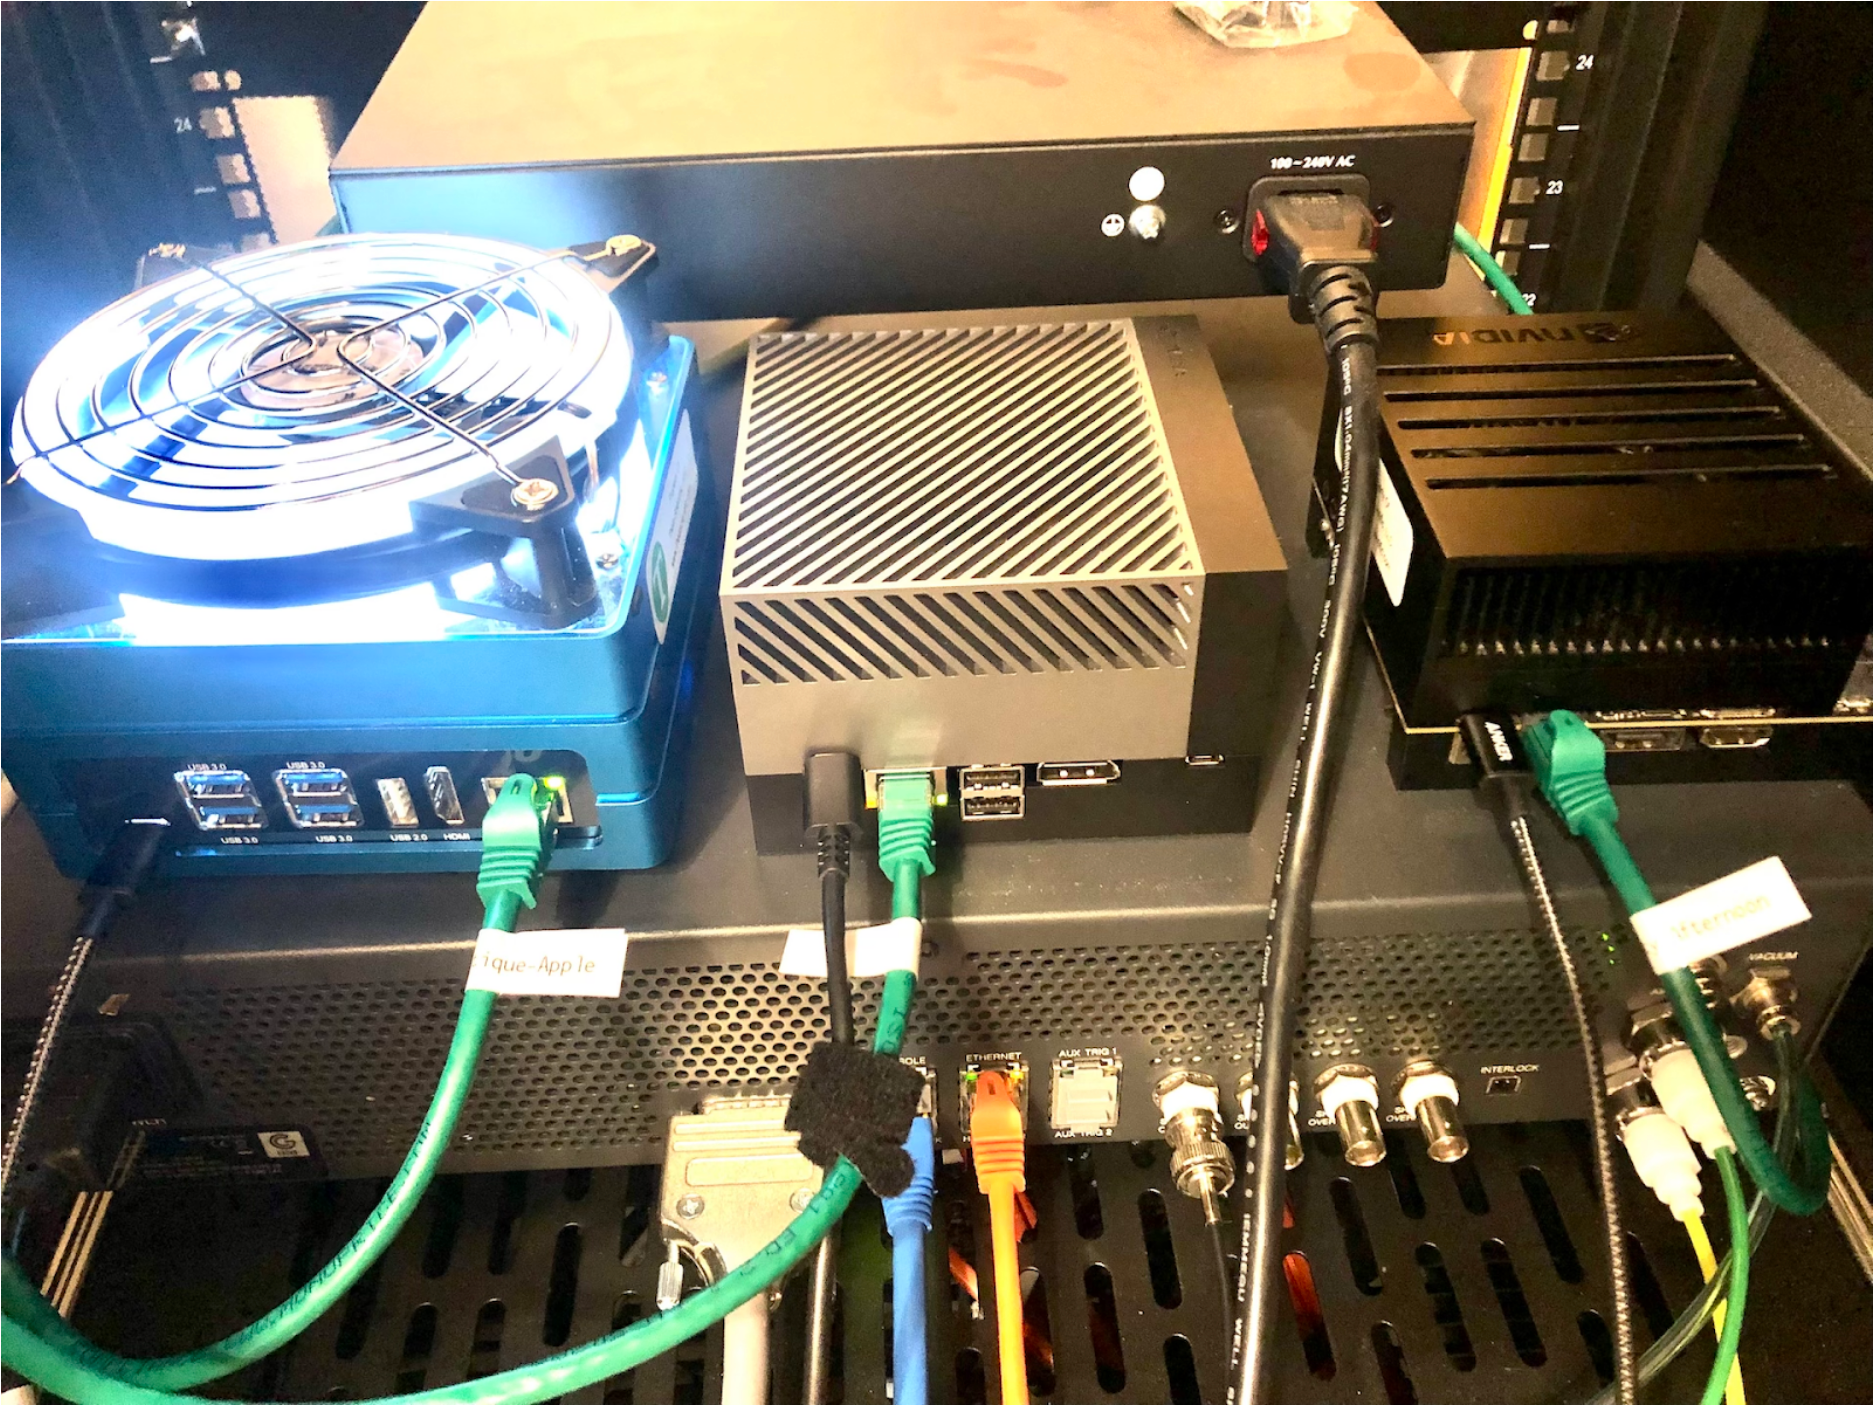 Deployment of SeeedStudio Jetson Mate Advanced, a NVIDIA Jetson AGX Orin Devkit, and NVIDIA Jetson AGX Xavier Devkit (left-to-right) at the University of Michigan - Ann Arbor’s Michigan Center of Materials Characterization, (MC)2